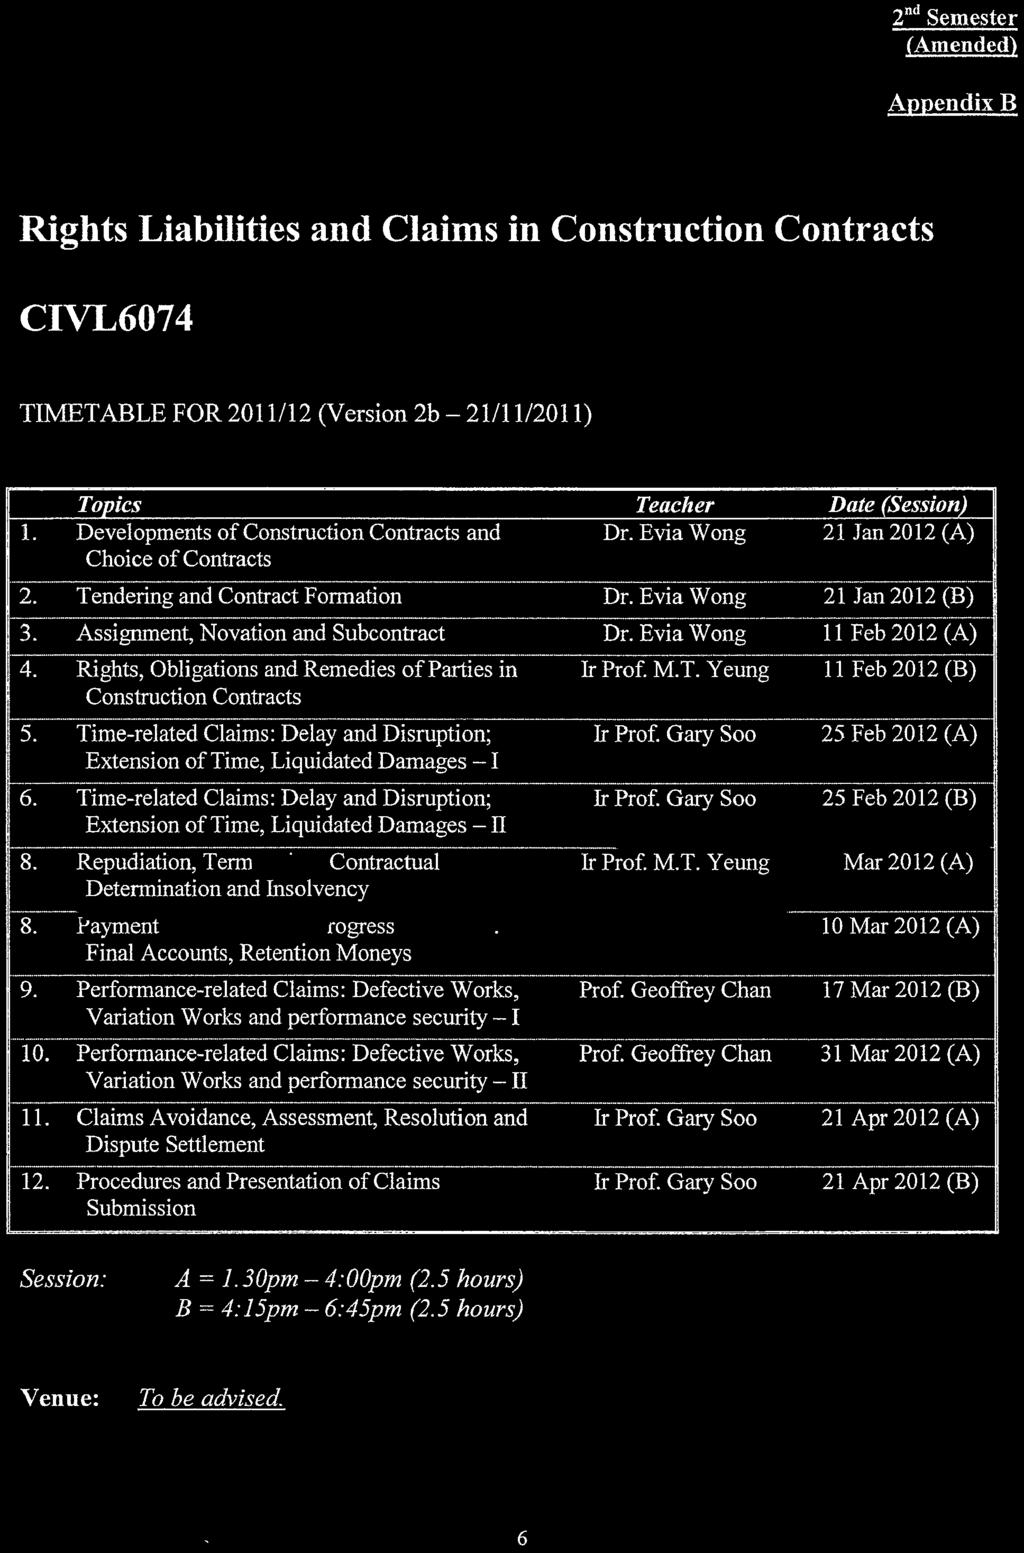 Appendix B Rights Liabilities and Claims in Construction Contracts CIVL6074 TIMETABLE FOR 2011/12 (Version 2b - 21/11/2011) Topics Teacher Date (Session) 1.